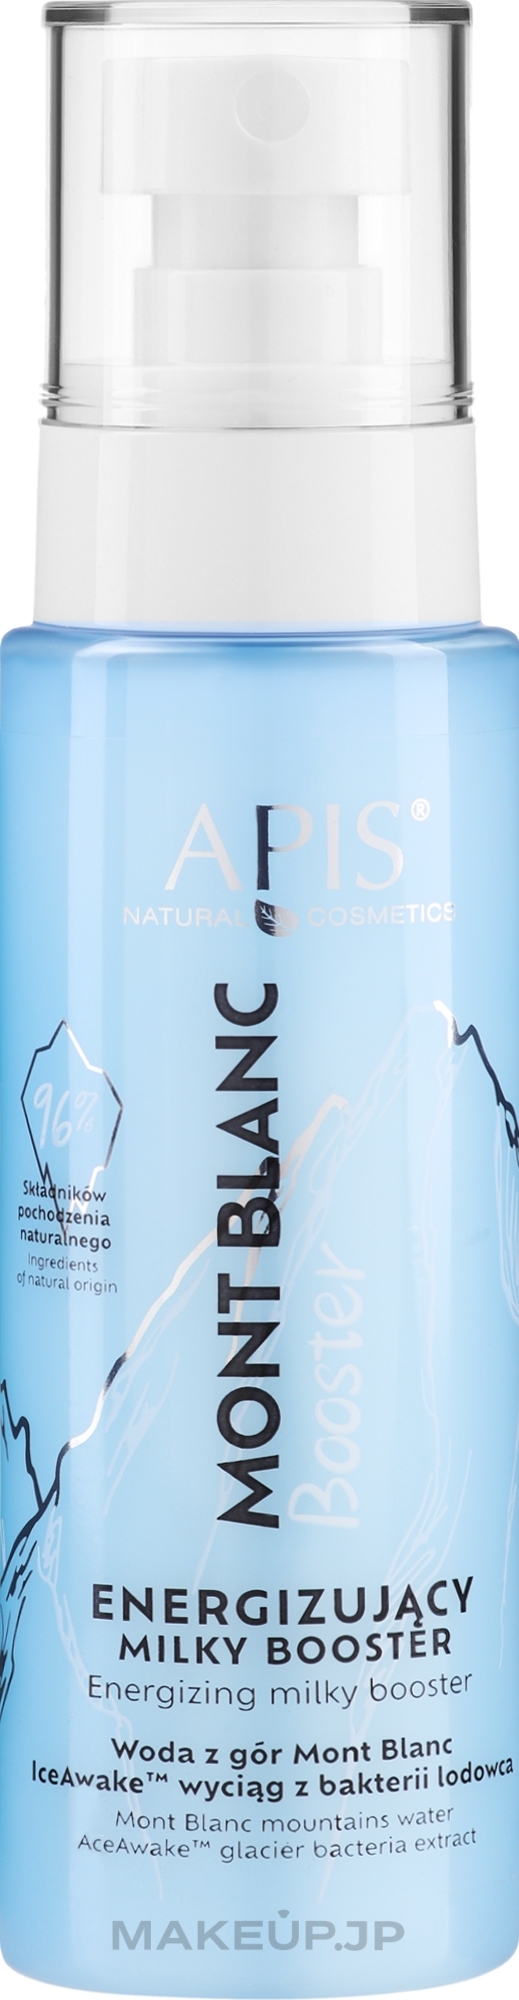 Energizing Milky Face Booster - APIS Professional Month Blanc Energizing Milky Booster — photo 100 ml